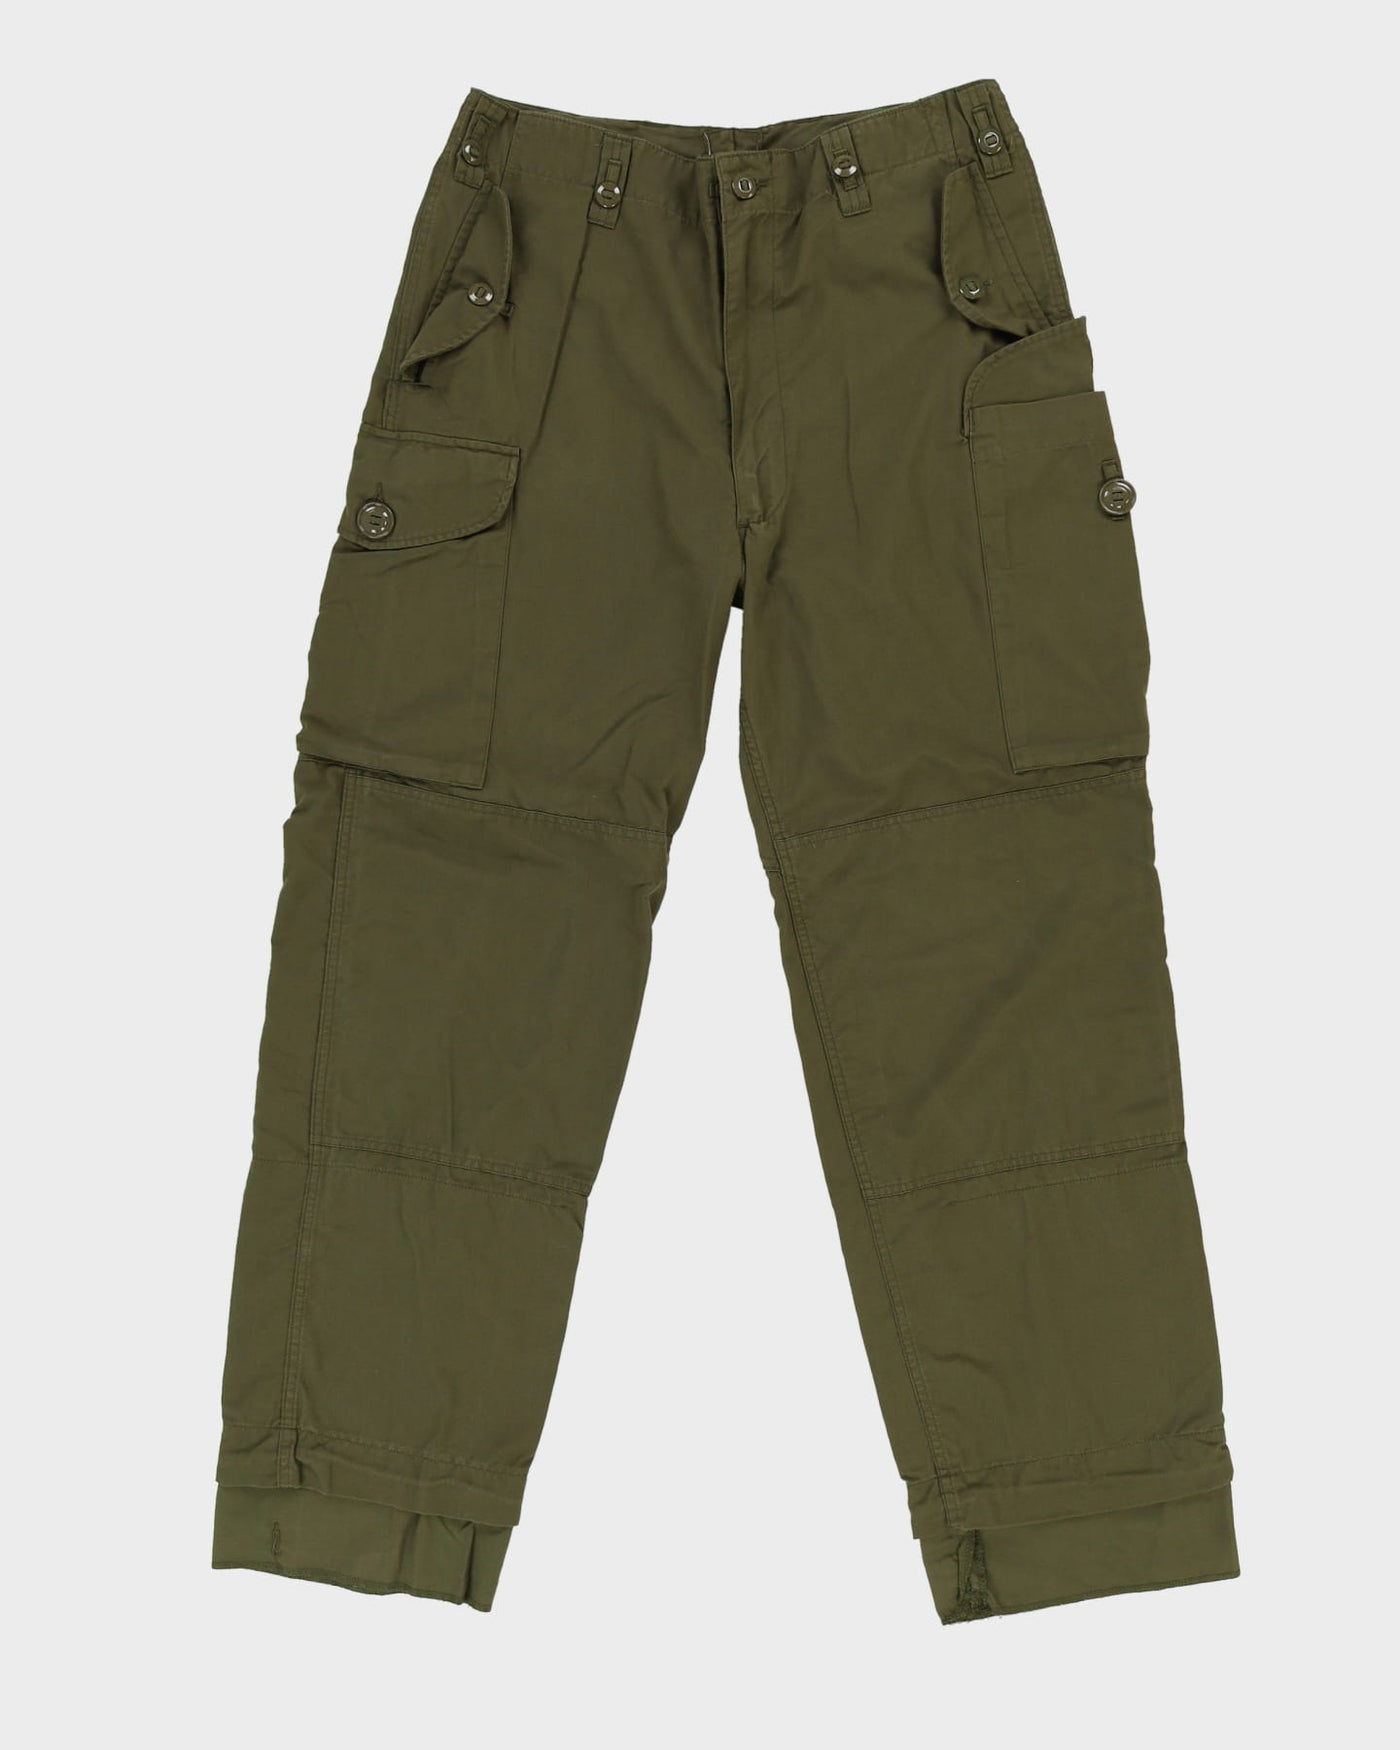 90s Vintage Canadian Army Lightweight Combat Trousers - 36x30